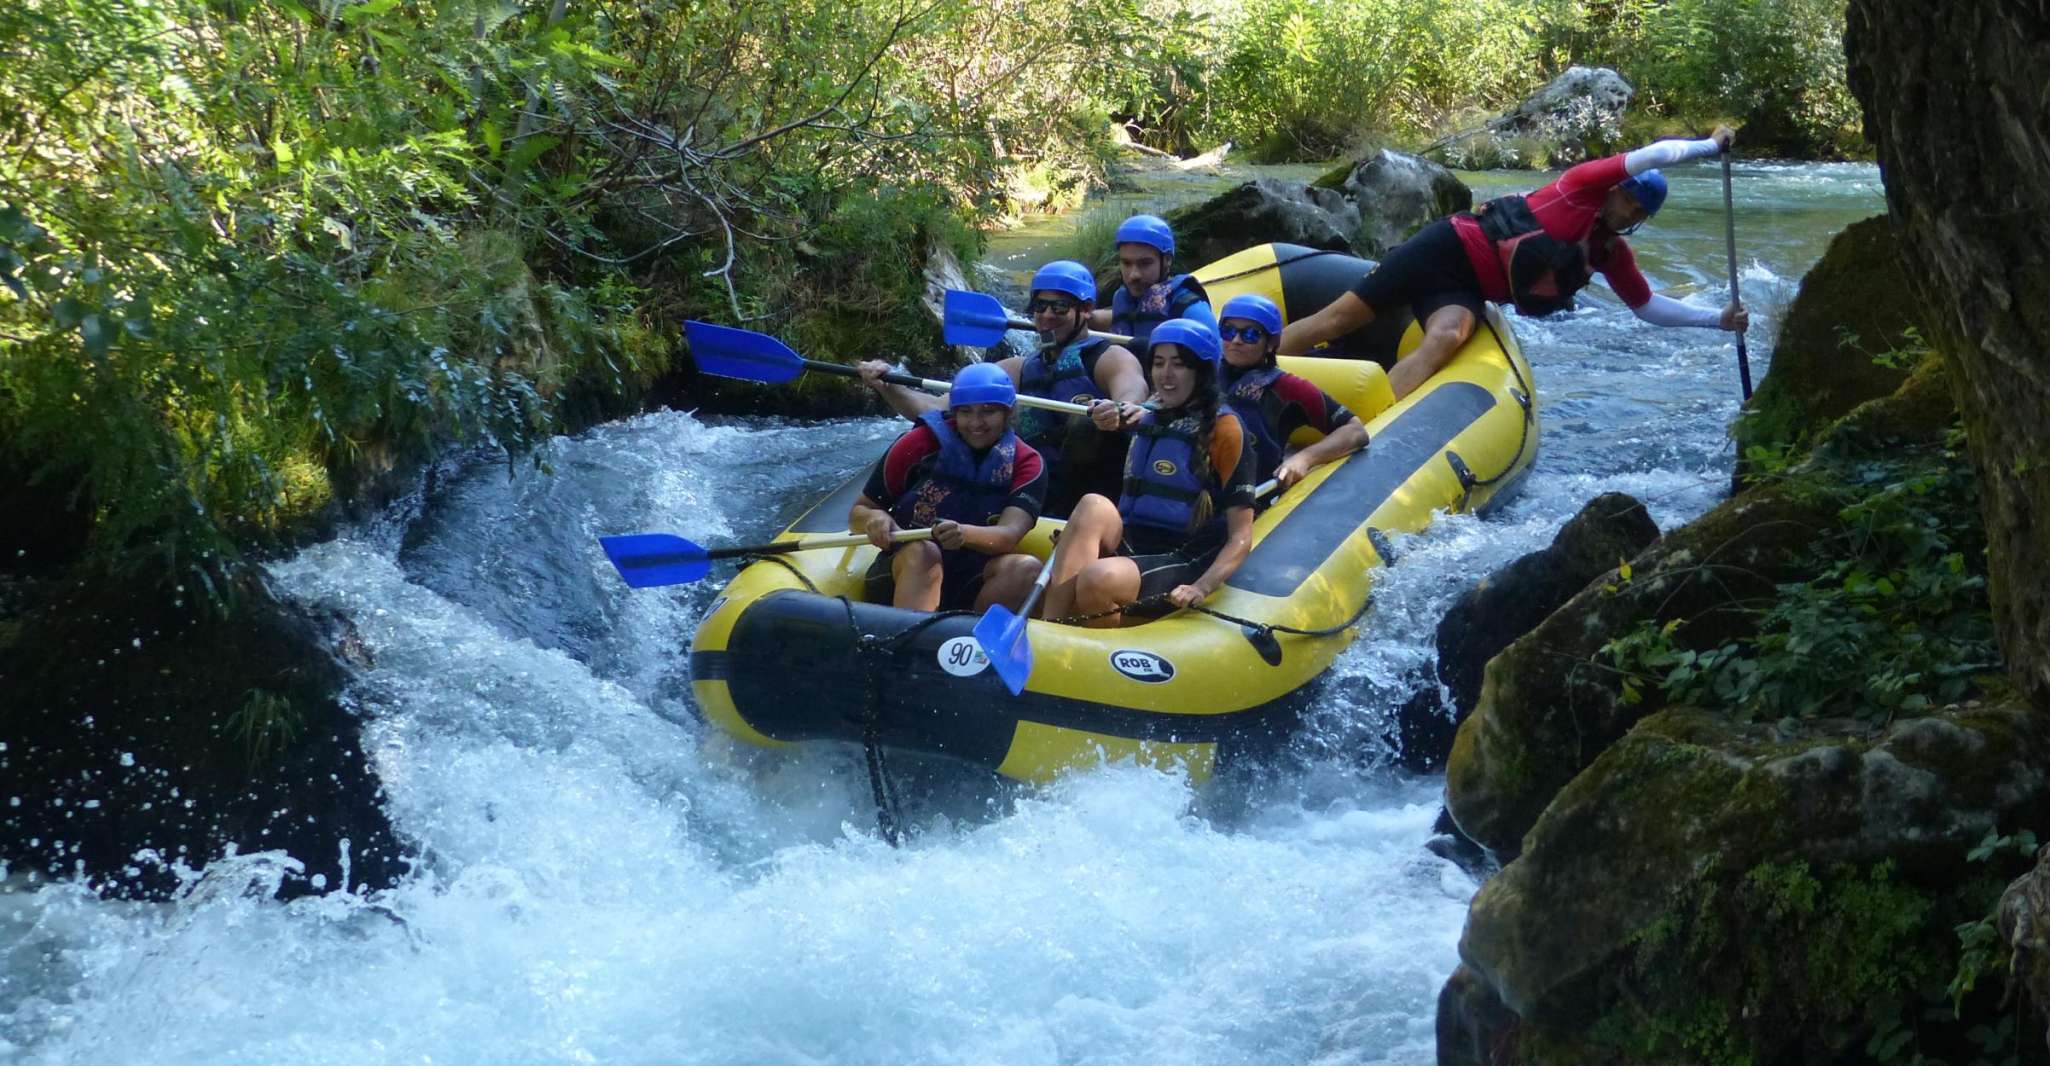 Cetina River, Rafting and Cliff Jumping Tour - Housity